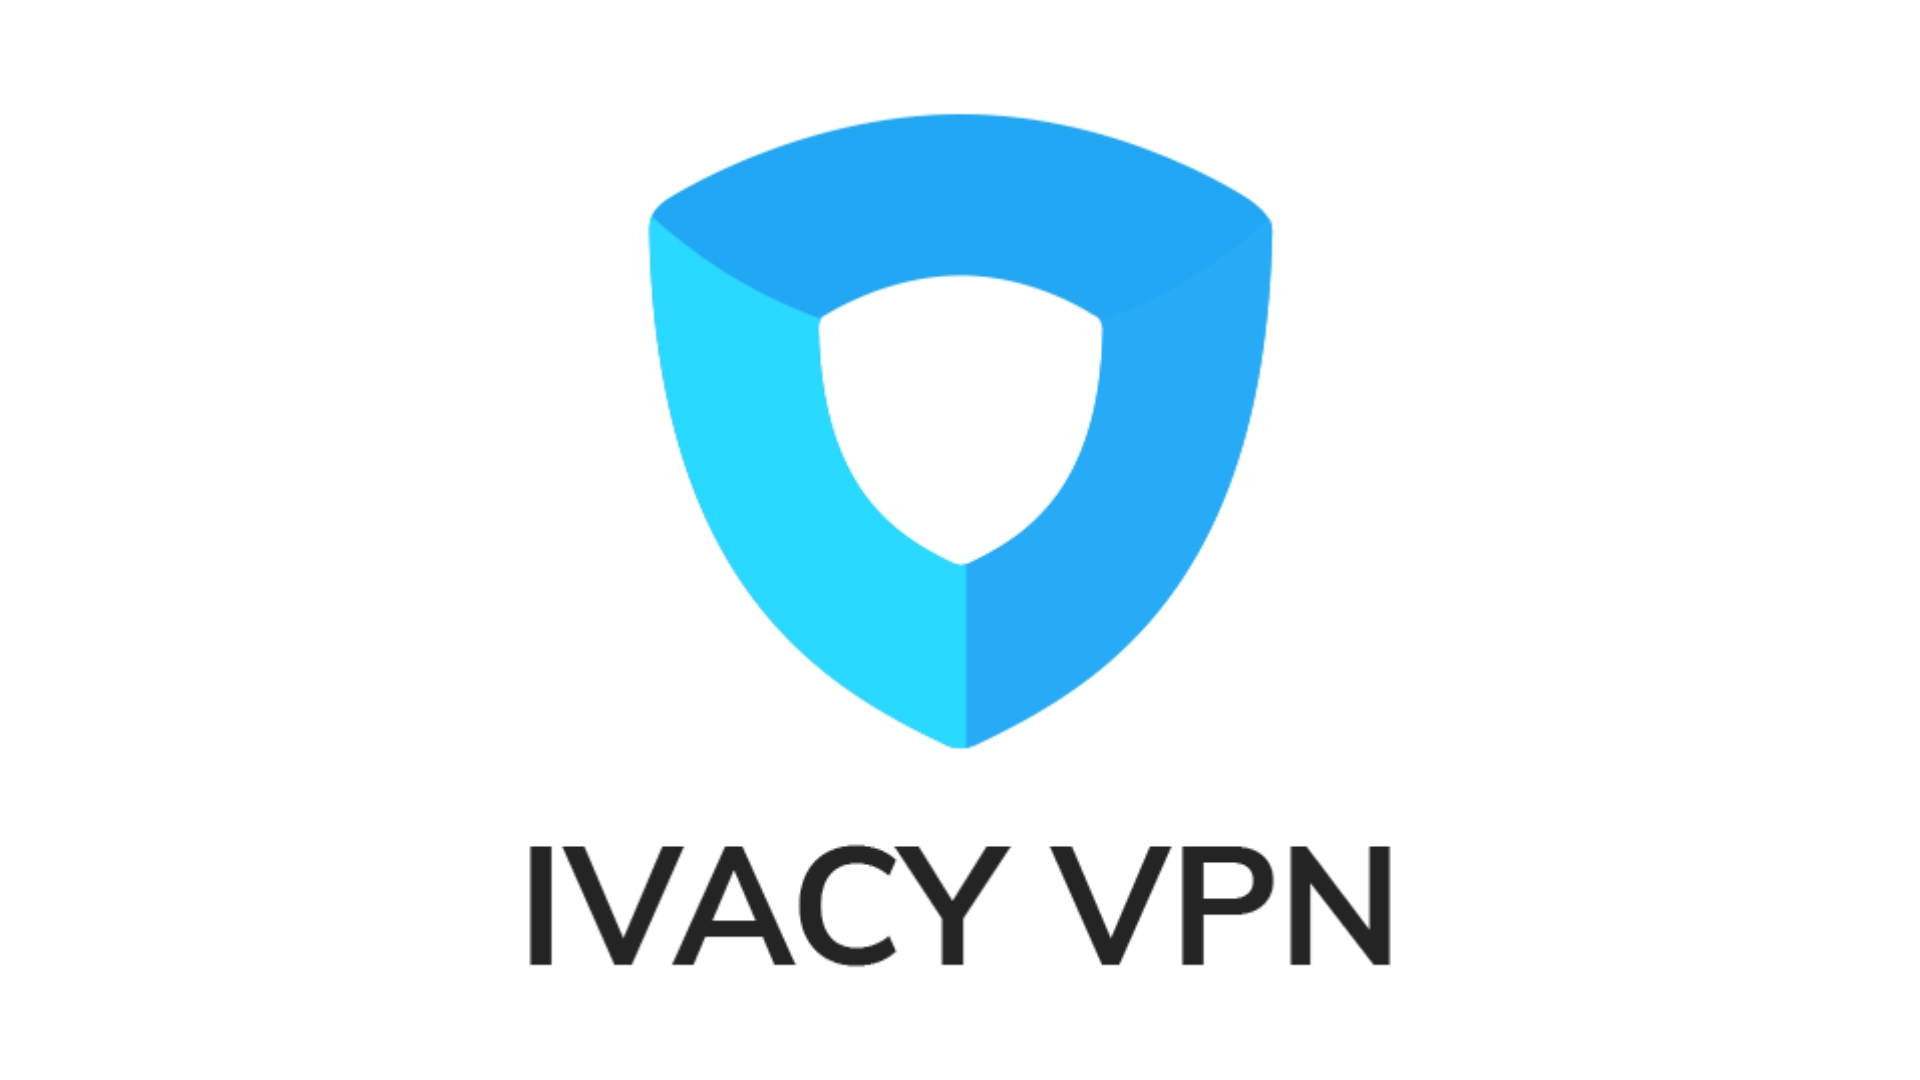 Best VPN in the USA: Ivacy VPN.  The image shows the company logo.